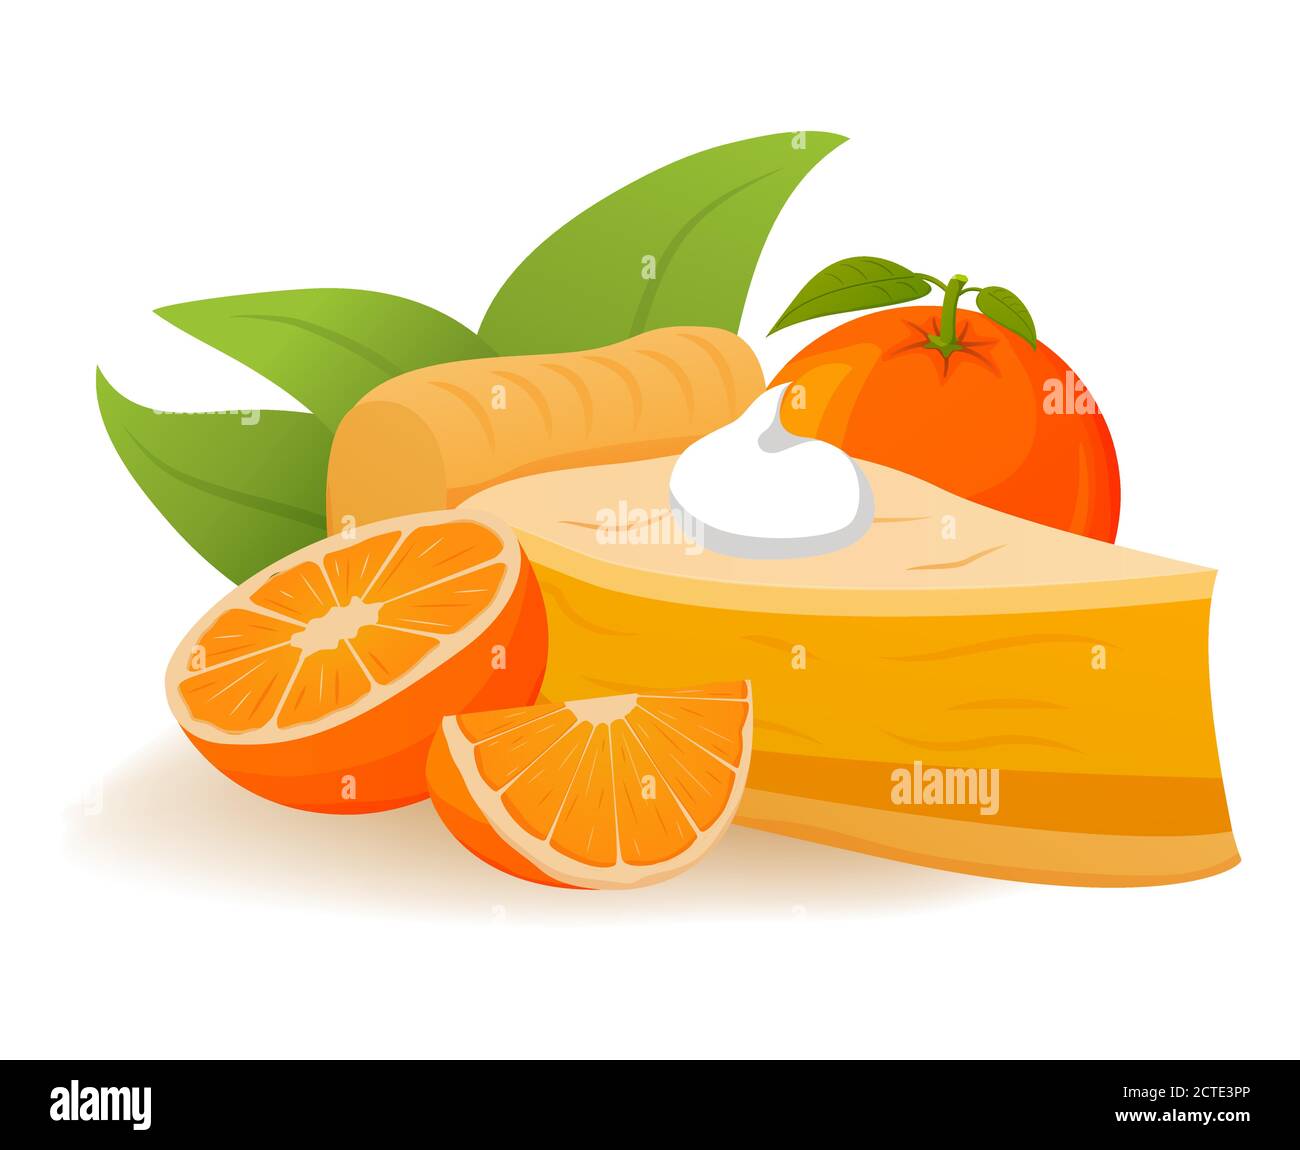 Realistic vector illustration.Isolated on a white background.Confectionery baked goods. Stock Vector